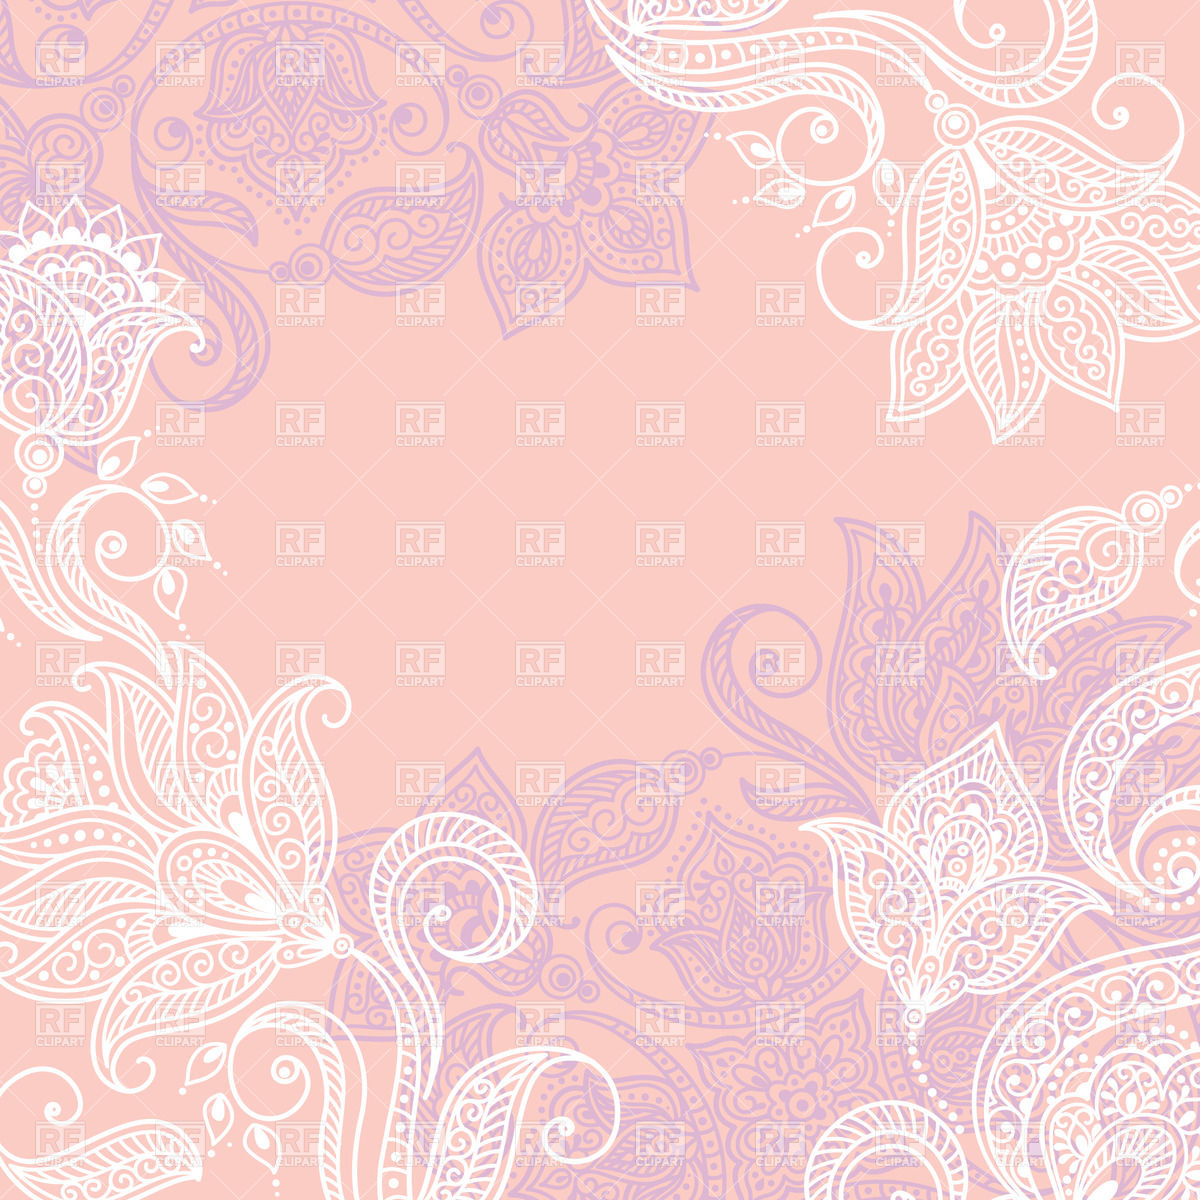 Light Floral Ethnic Ornament Vector Image Of Background Textures